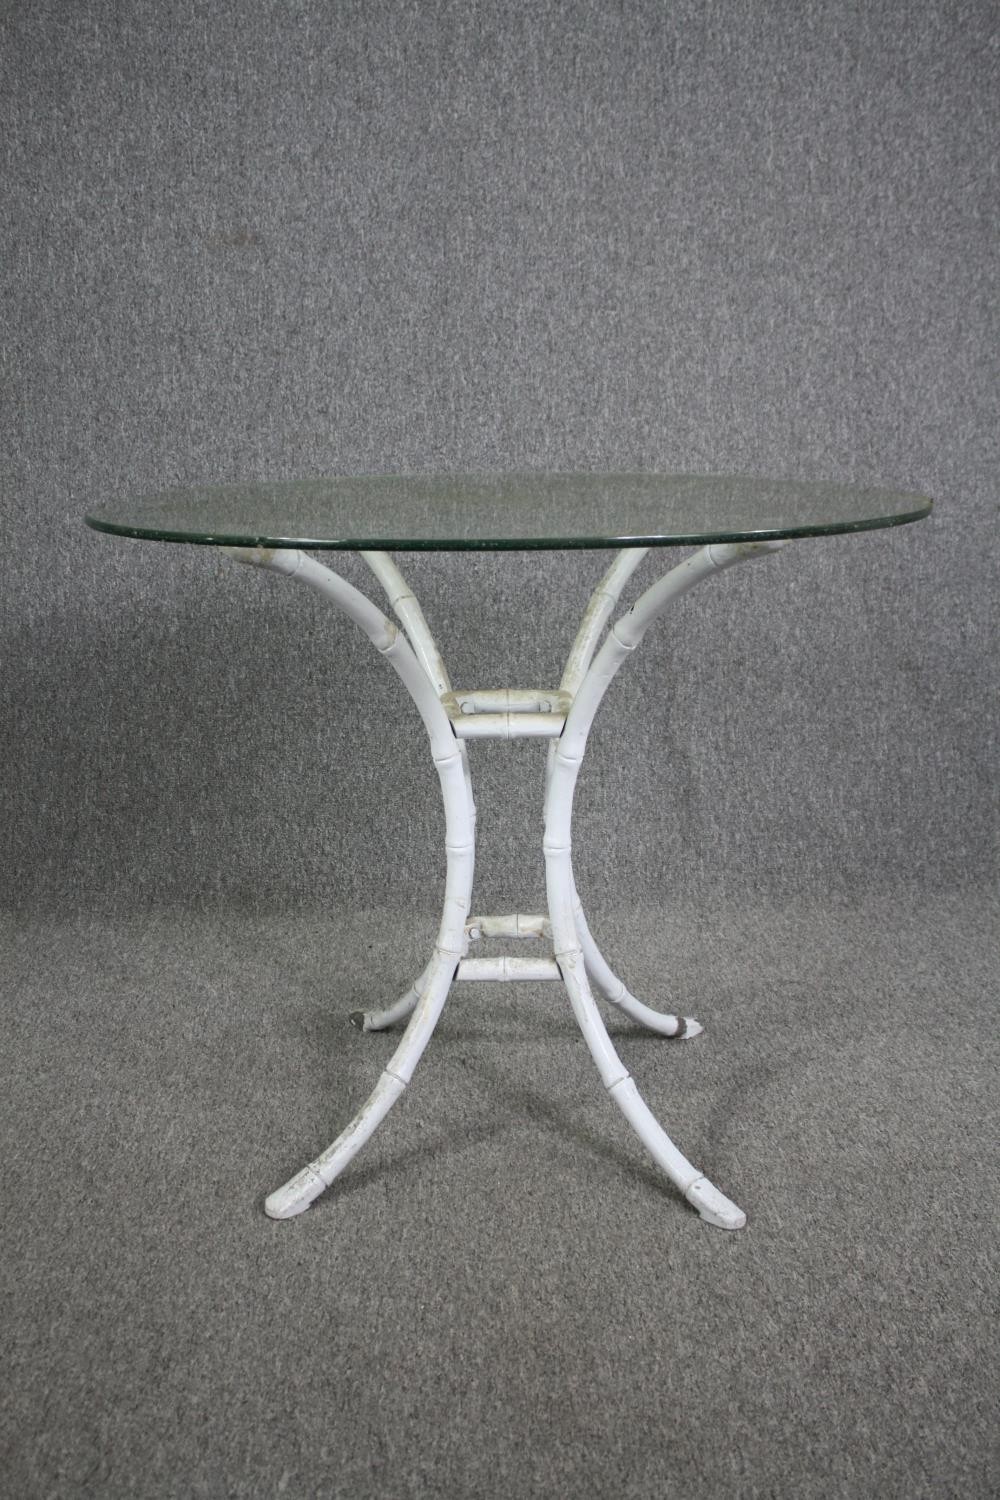 Garden or conservatory table, plate glass on faux bamboo painted metal base. H.74 Dia.91cm. - Image 3 of 4